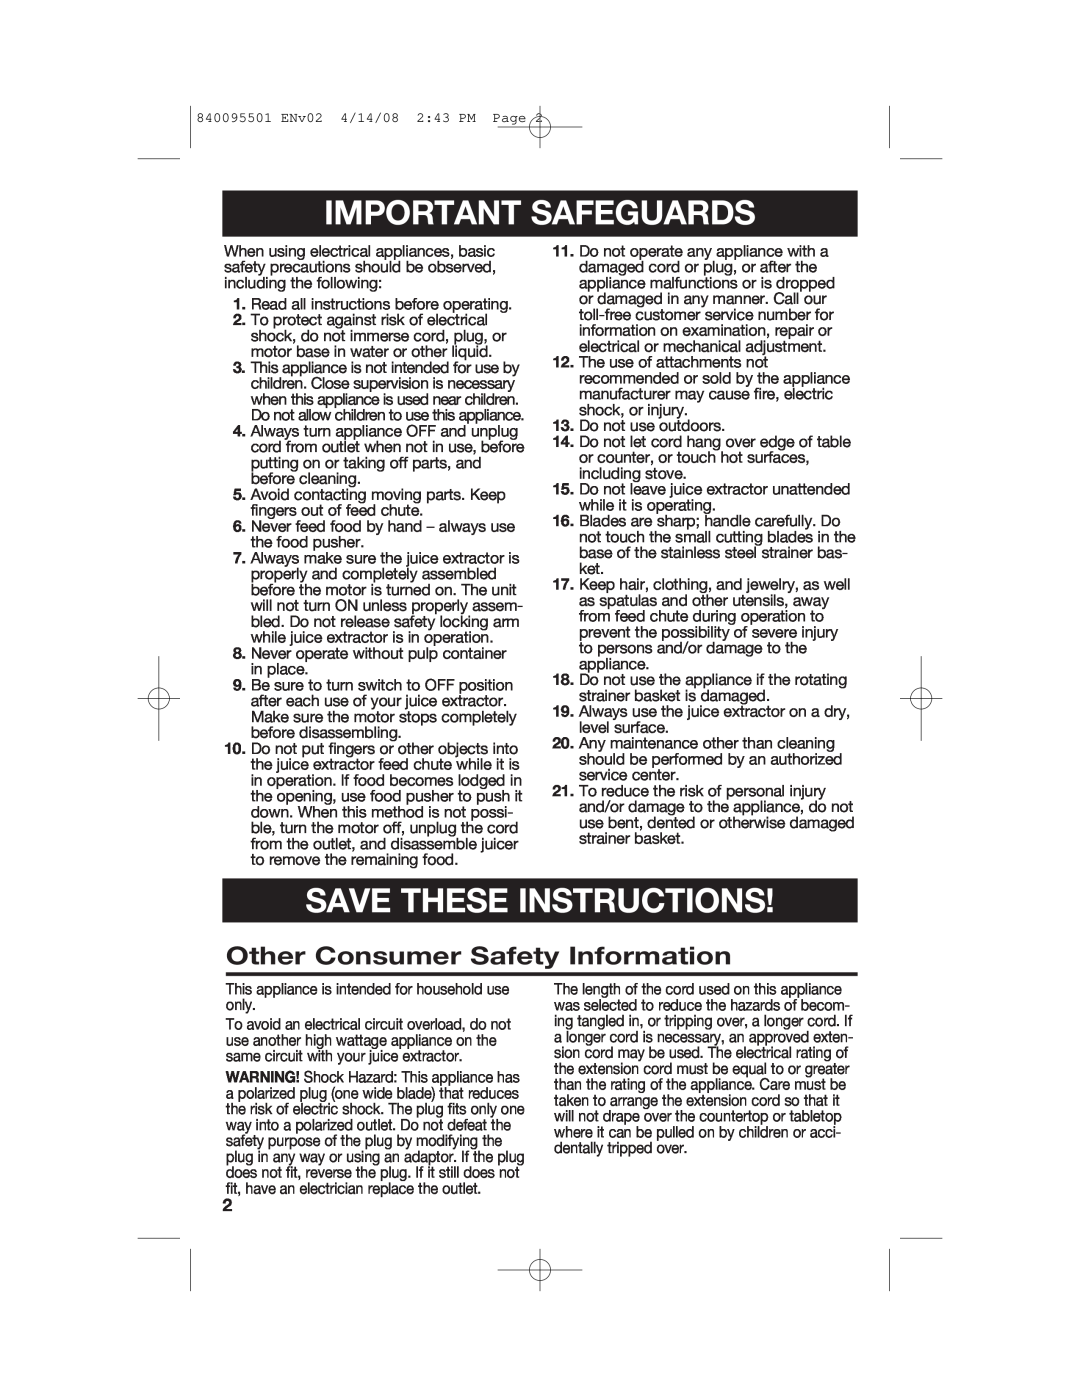 Hamilton Beach 840095501 manual Important Safeguards, Save These Instructions, Other Consumer Safety Information 